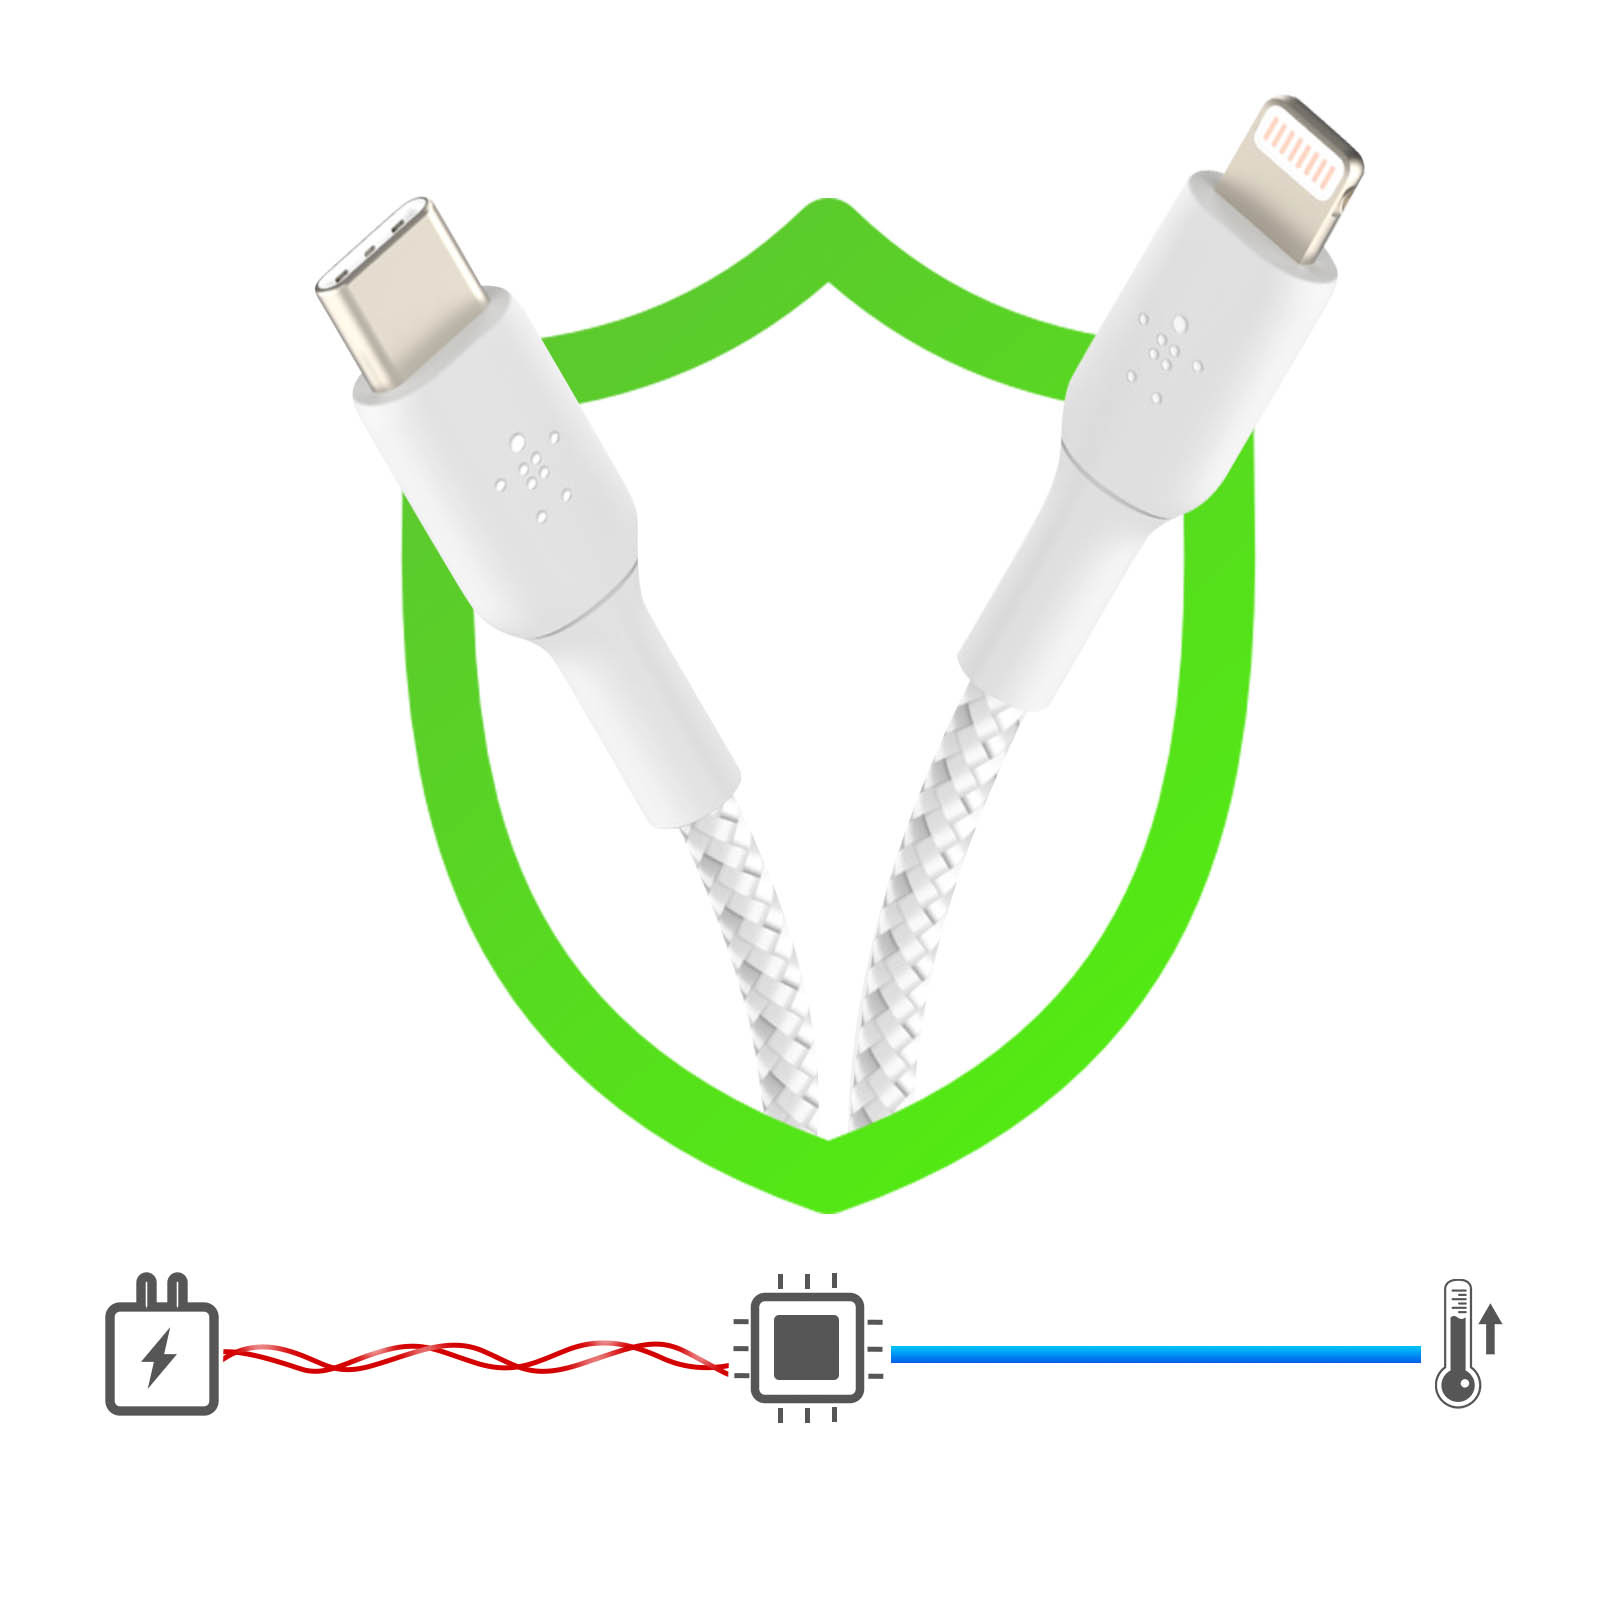 Cable De Usb-c A Lightning Boost Charge 1m Blanco - Belkin